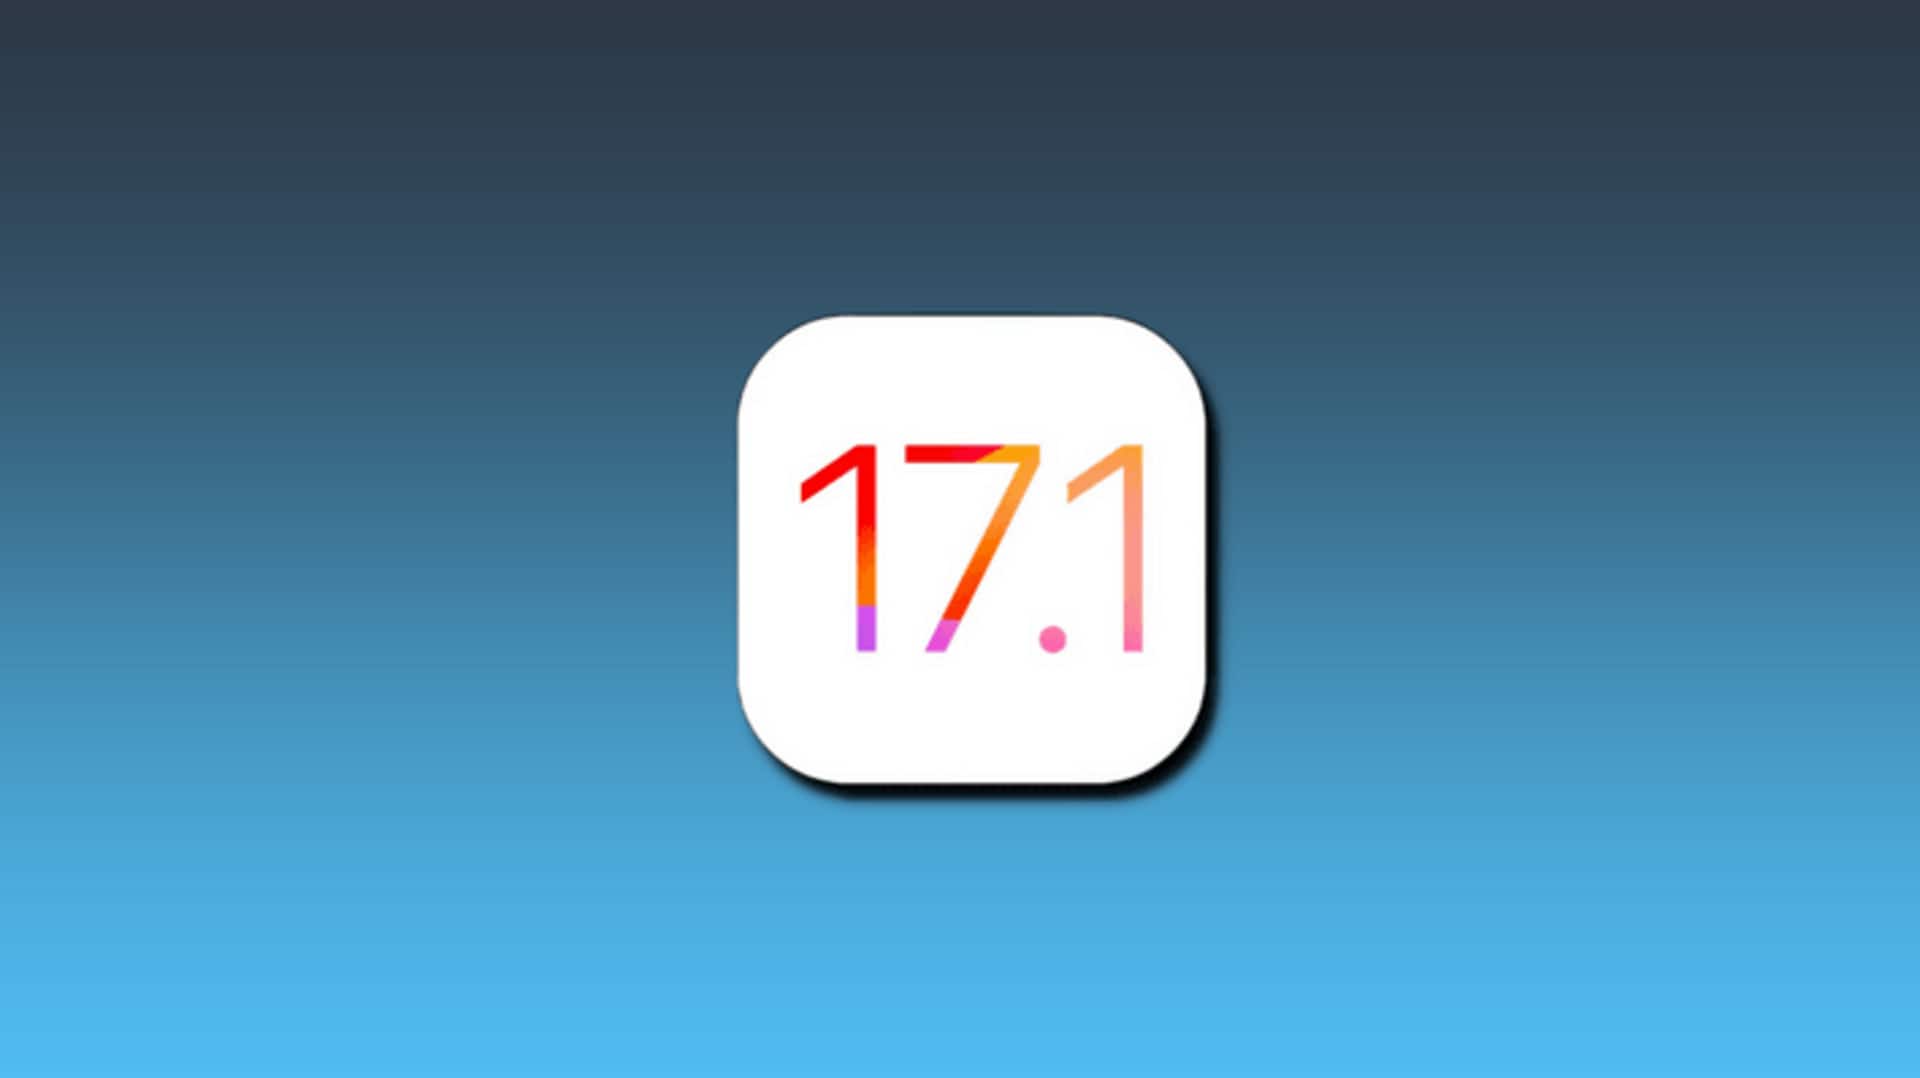 iOS 17.1 may release today: Check new features, bug fixes